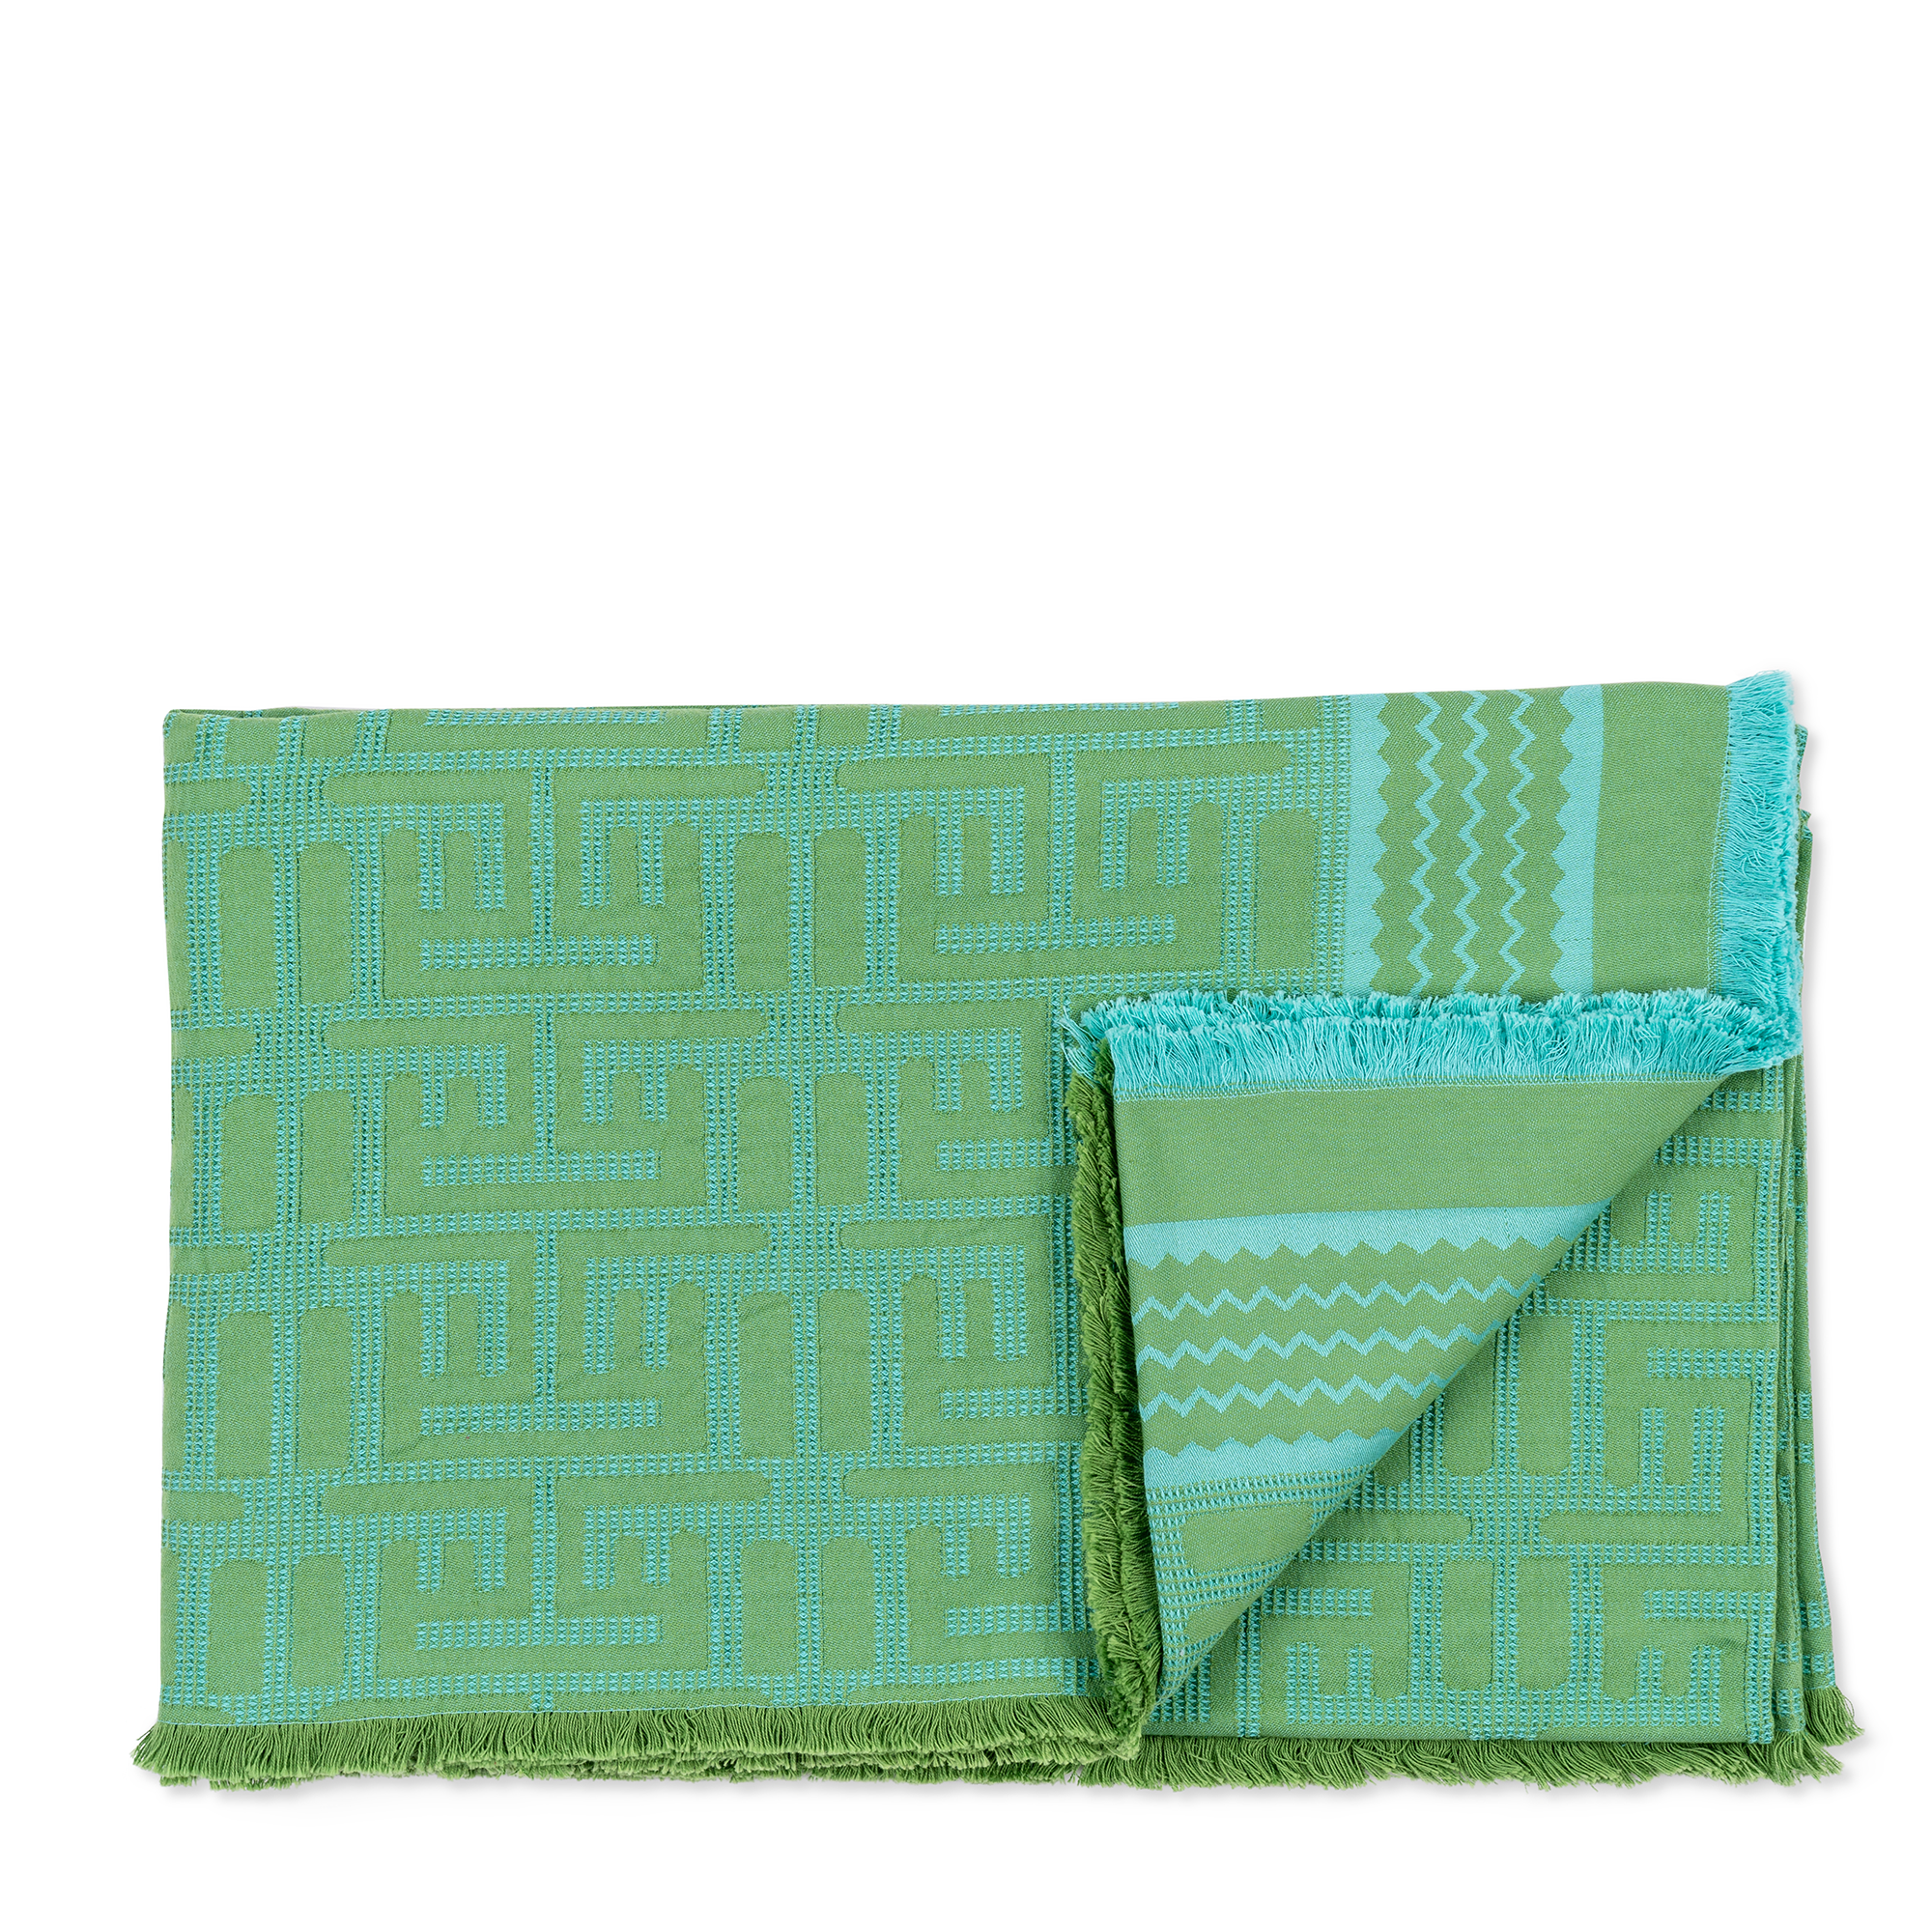 A green and turquoise beach mat with a geometric pattern, featuring 100% cotton fabric. This beach mat is lightweight and portable, ideal for beach outings and picnics.